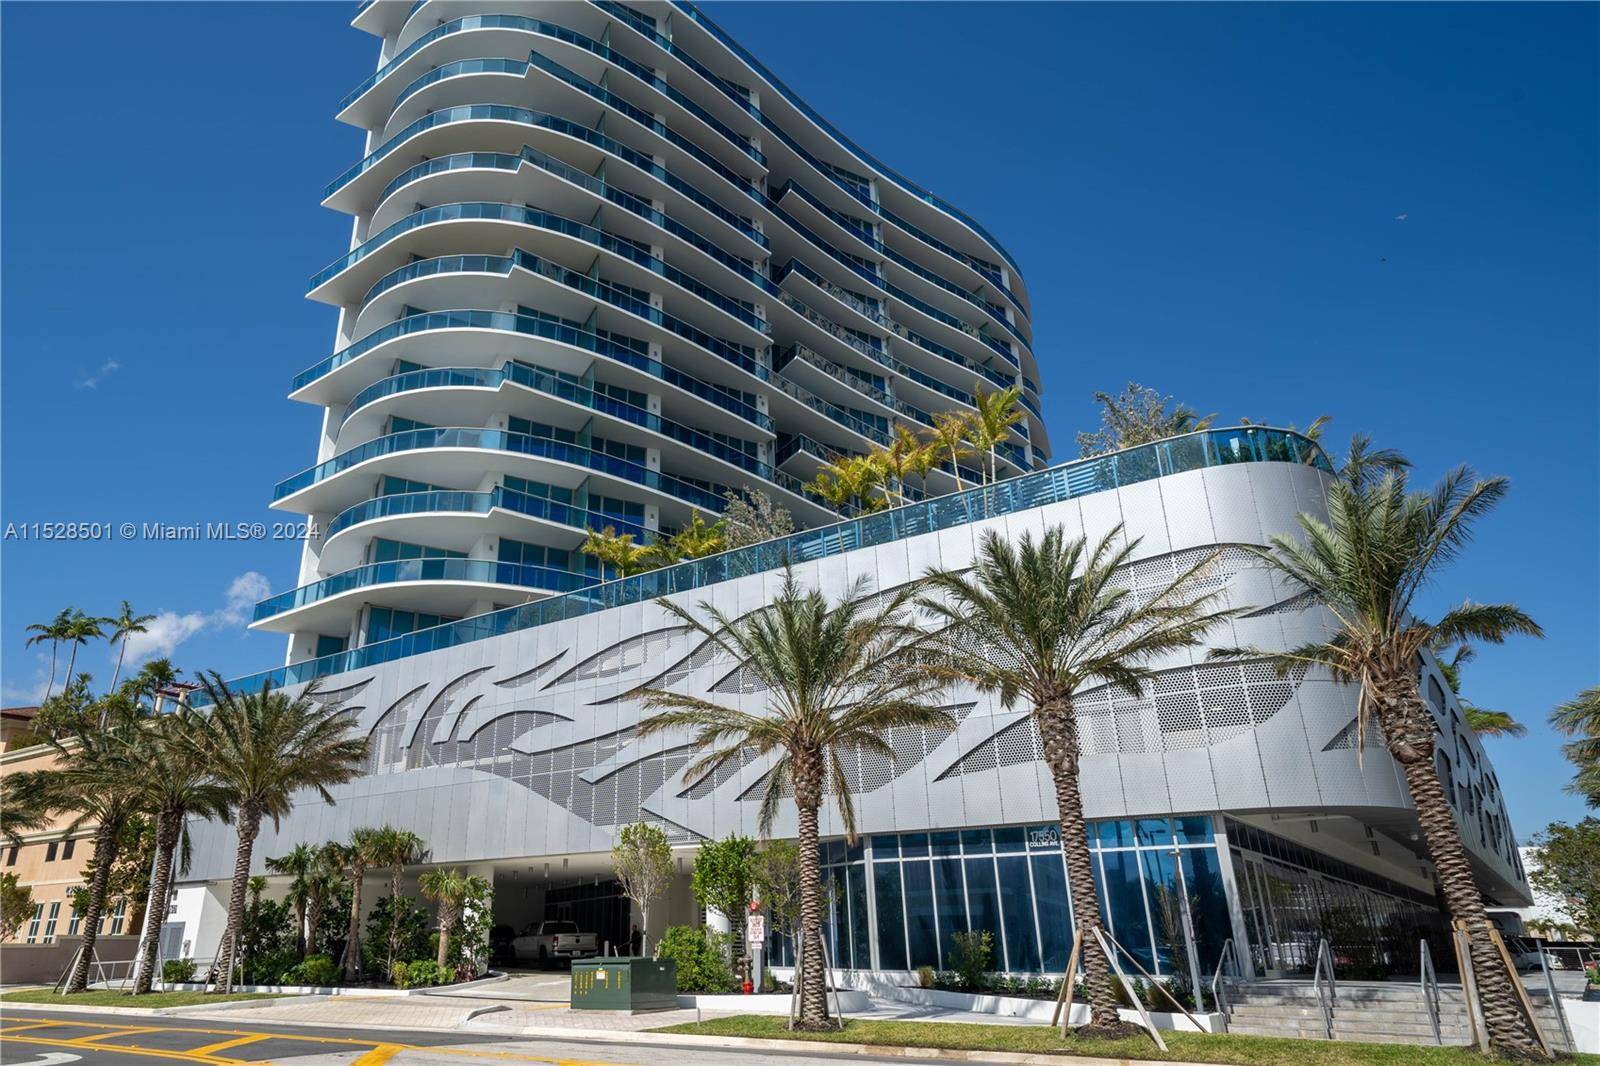 NEW NEW NEW ! ! ! Aurora Sunny Isles is a brand new luxury boutique building located in Sunny Isles Beach, Unit has 3 bed 3 baths !